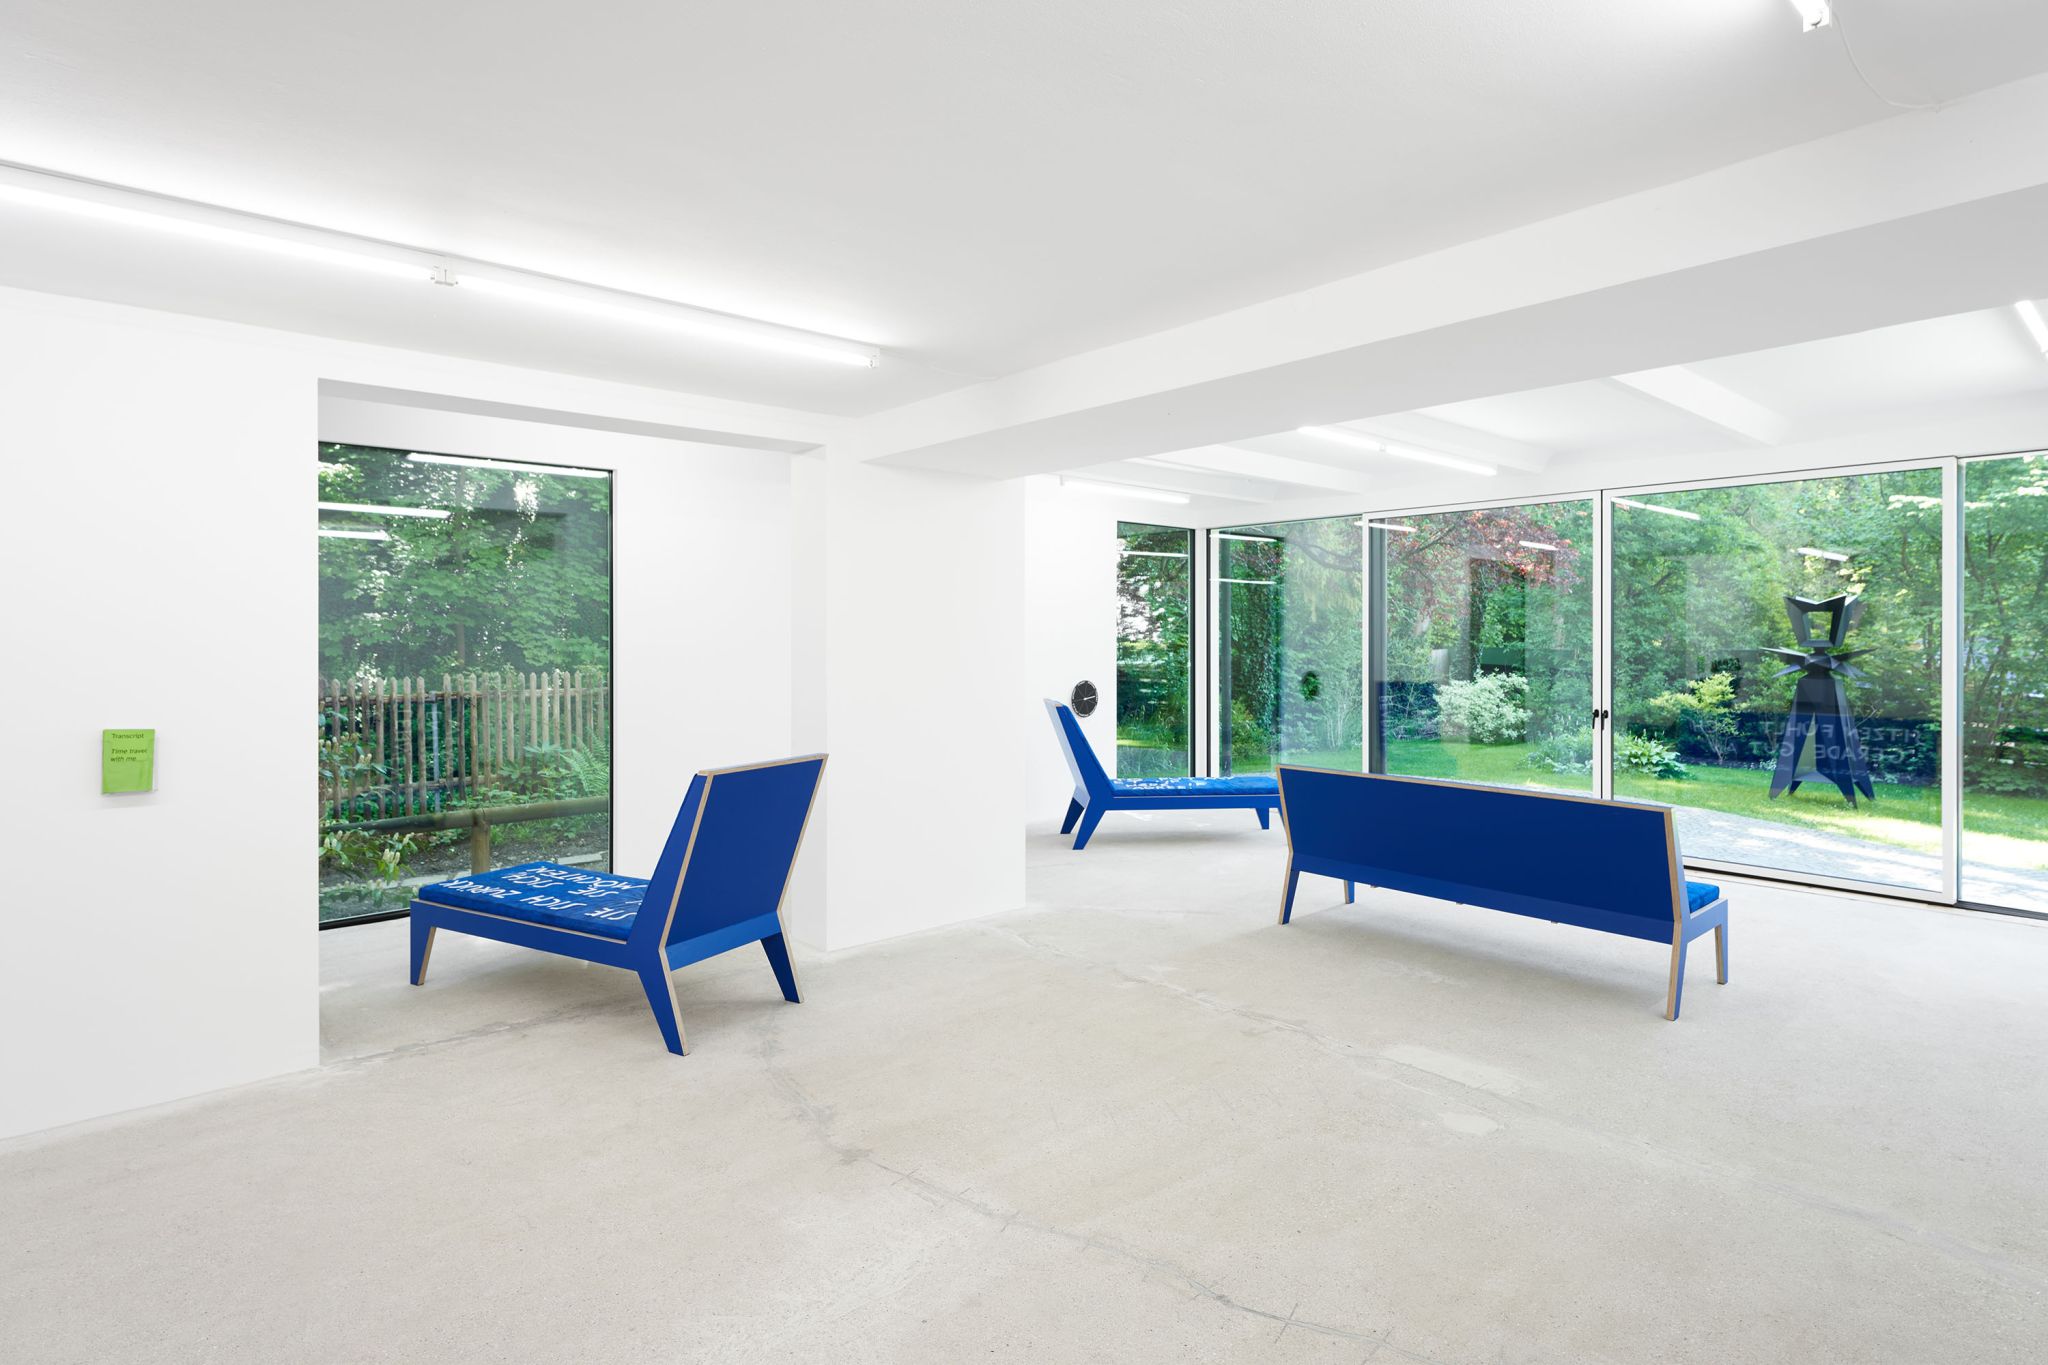 Finnegan Shannon, <em>Slower,</em> Installation view, Deborah Schamoni, 2022, Image description: Two blue chaise lounges and a blue bench in an exhibition room. They all face towards different windows into a garden. A green zine and a black clock are hanging on different walls.